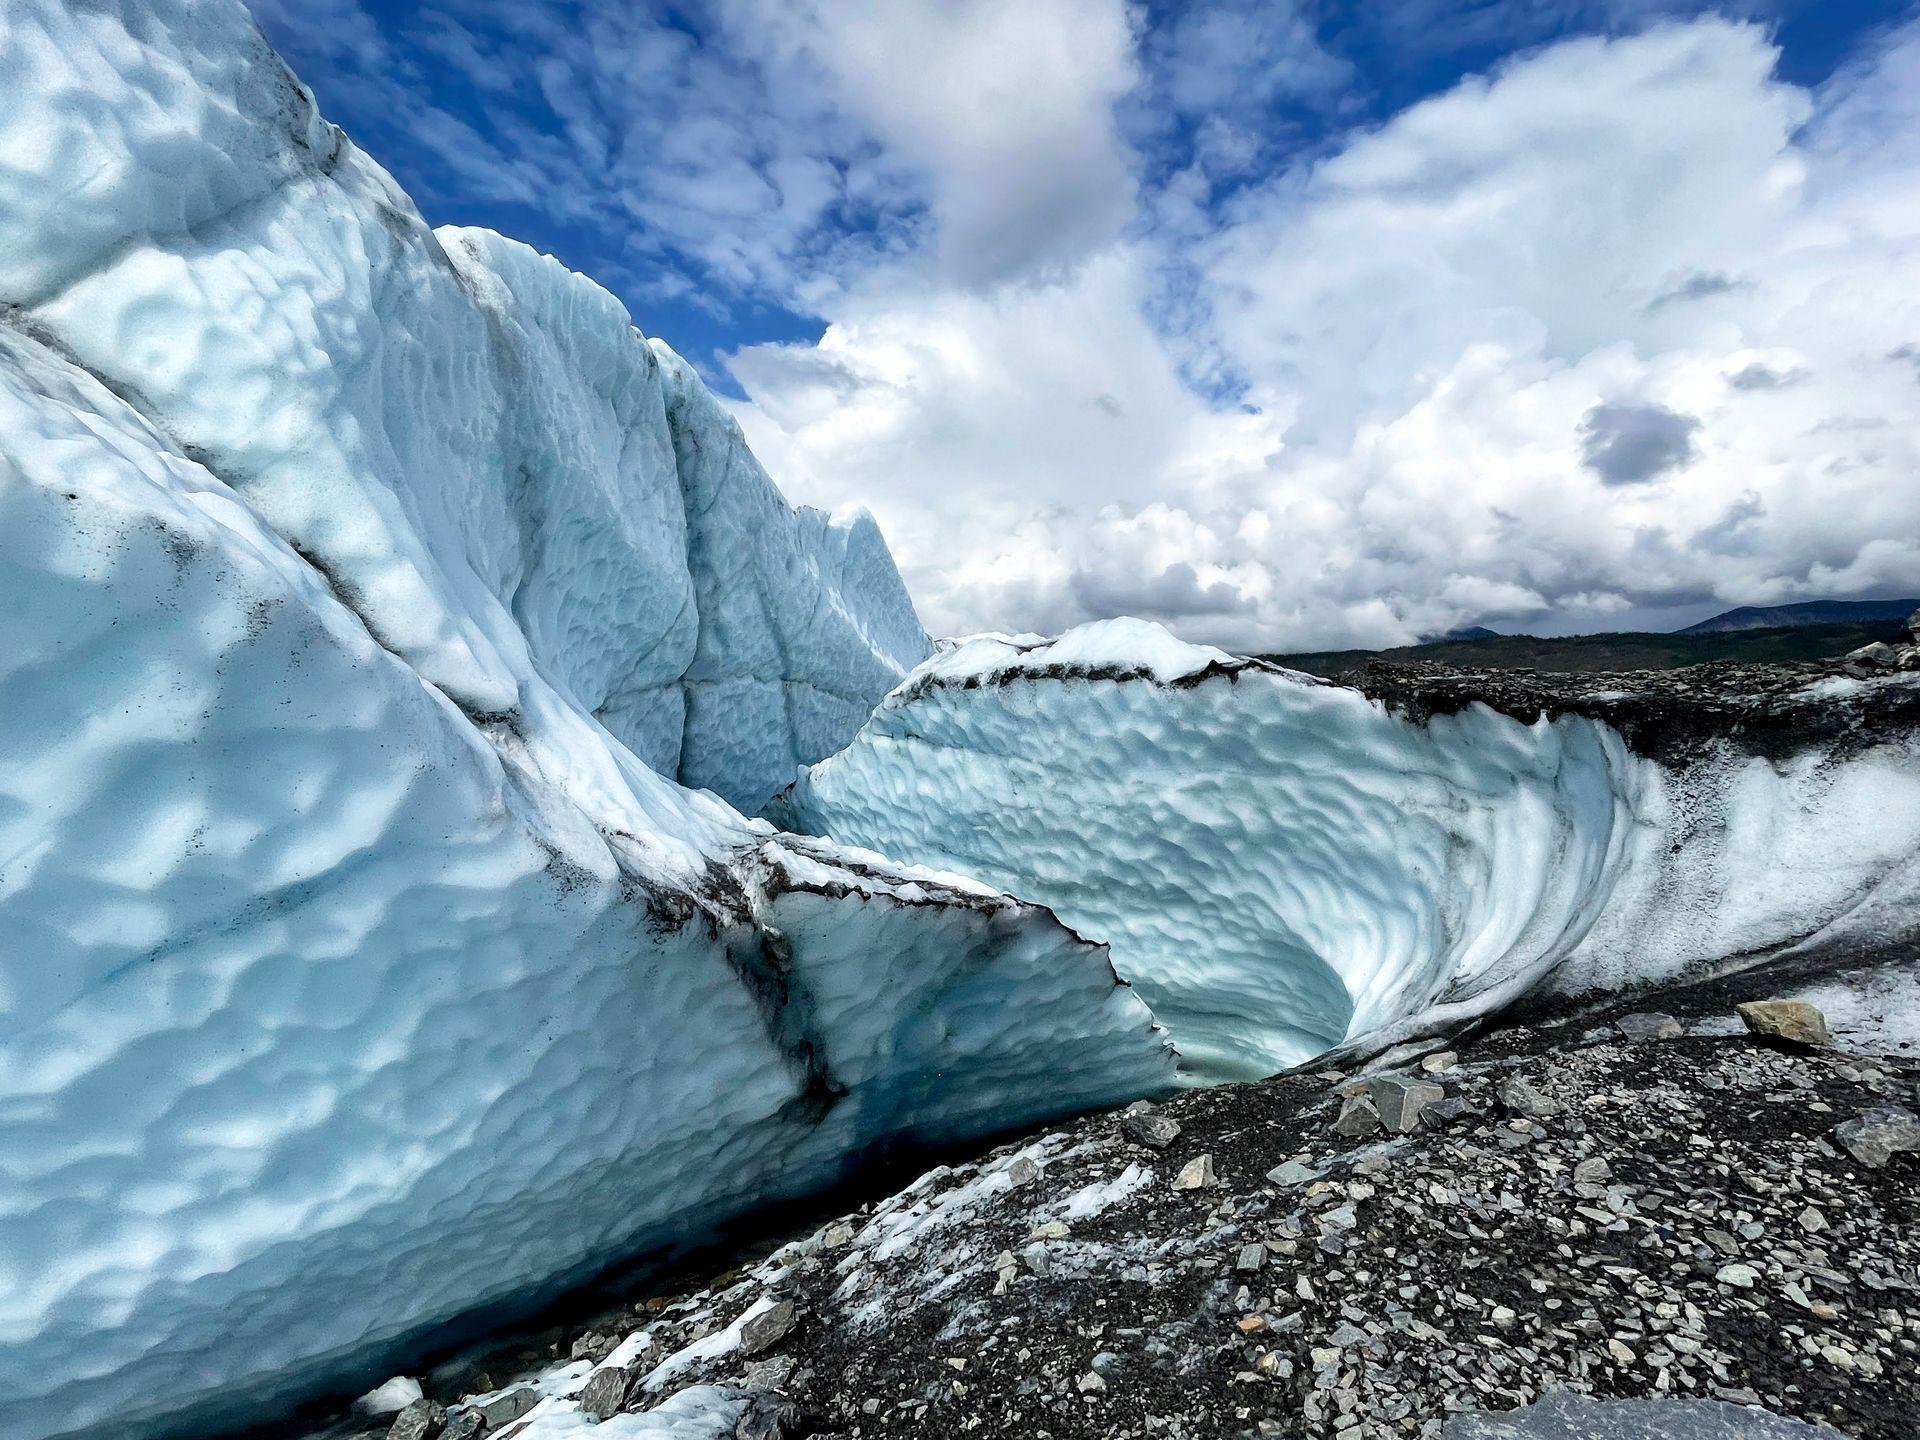 Blue glacial ice sticking up and twirling around at Matanuska Glacier.